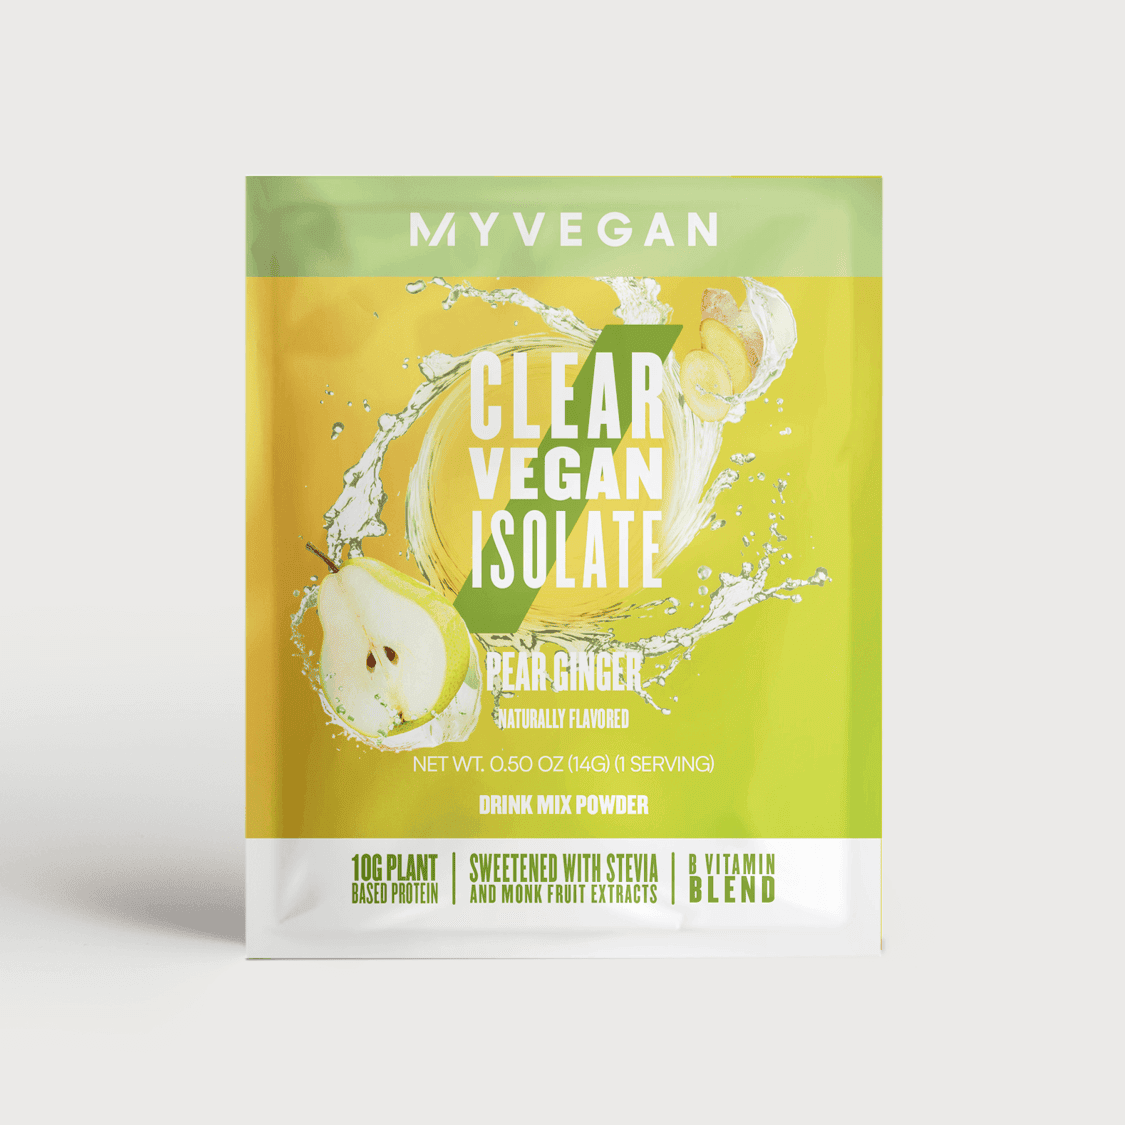 Clear Vegan Isolate - Suco de Proteína Vegana Isolada (Amostra - 1servings - Pear Ginger